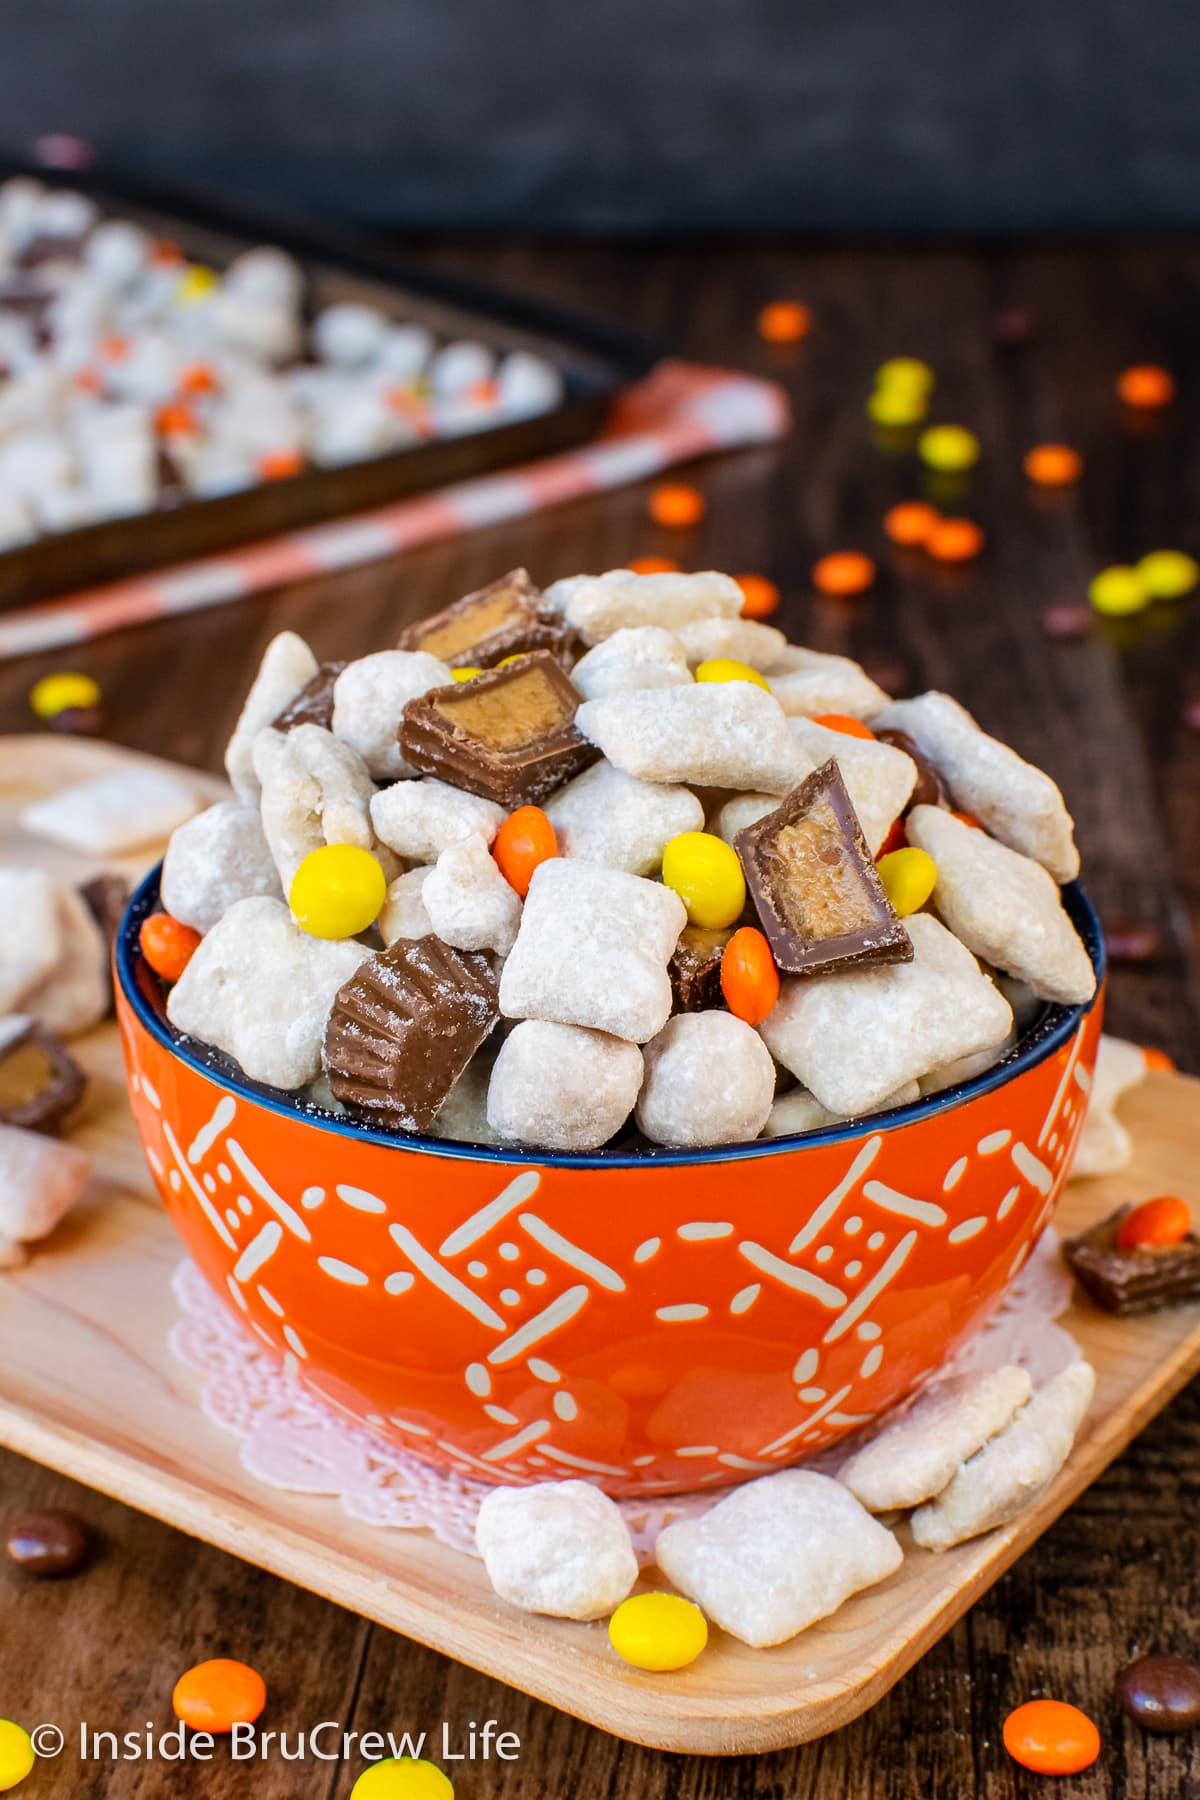 An orange bowl full of Reese's puppy chow.